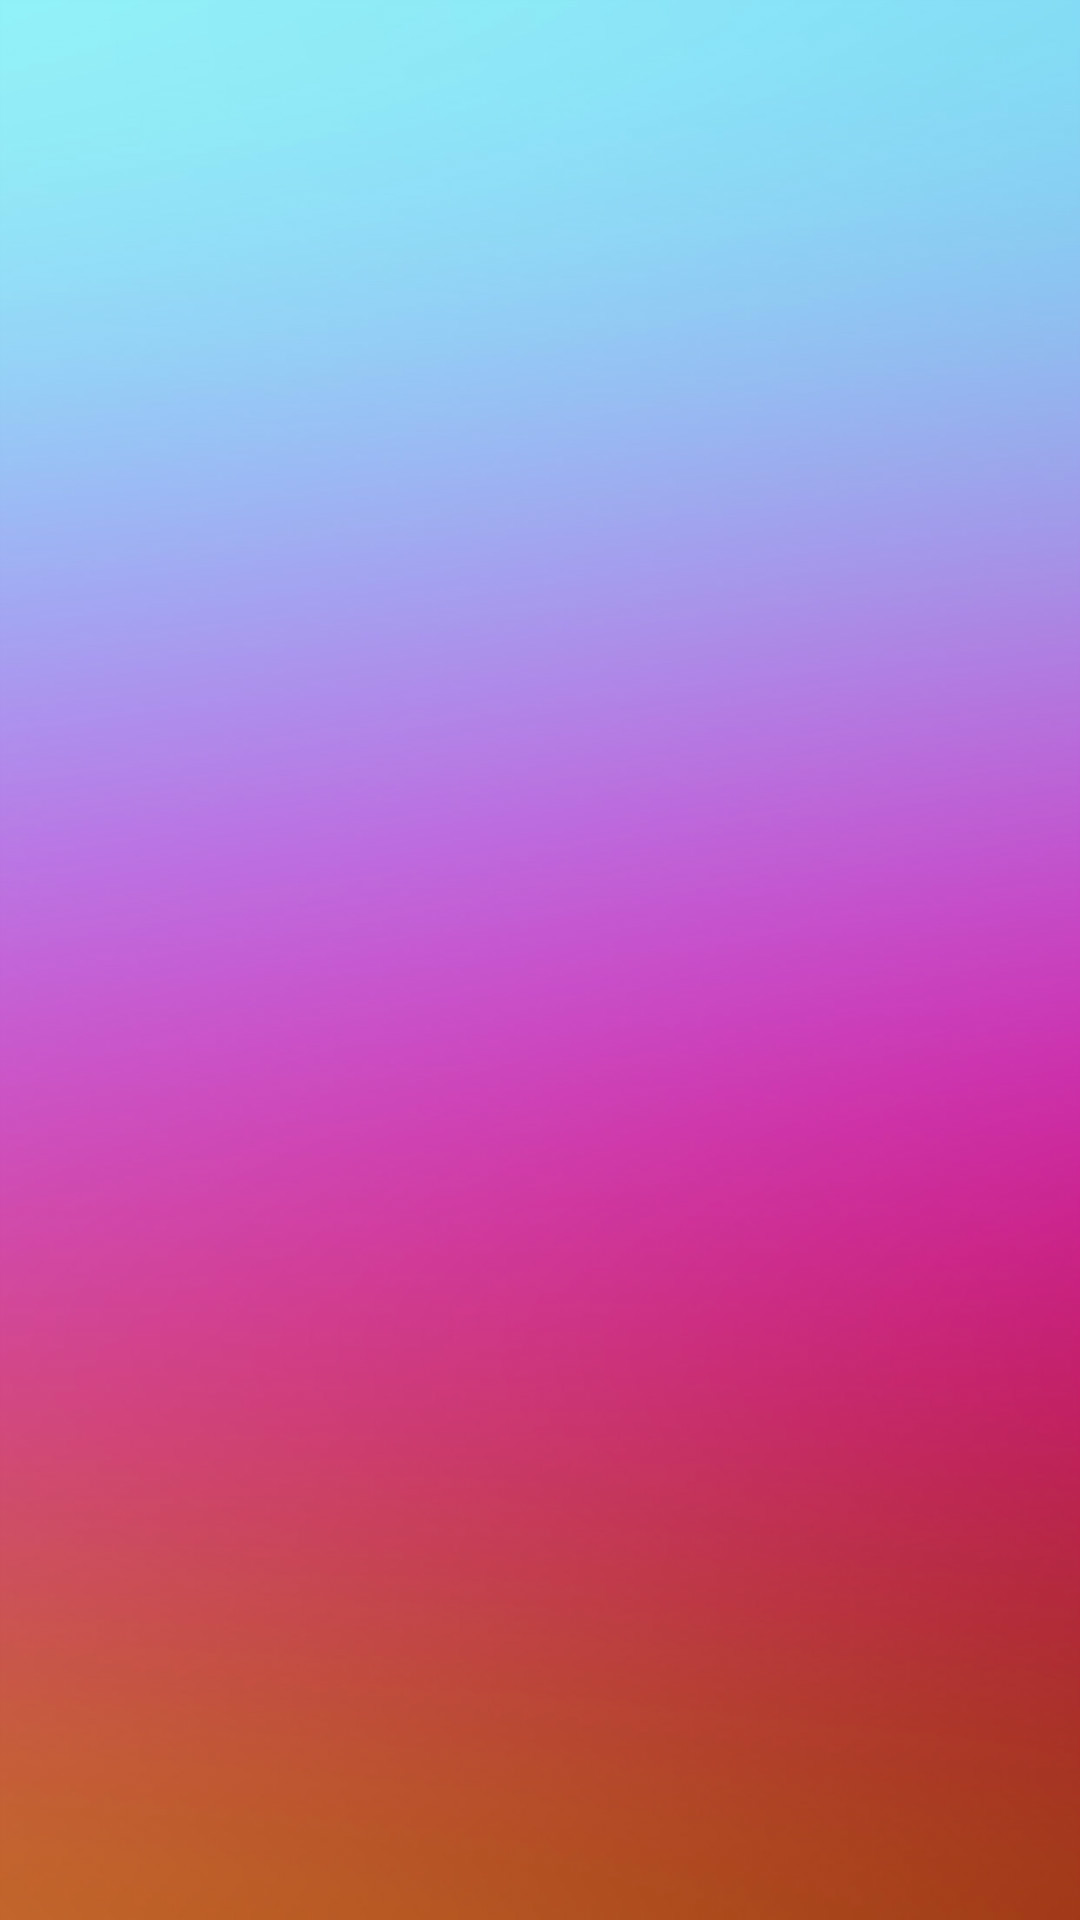 1080x1920 Blue And Red Color Gradation Blur iPhone 6 wallpaper